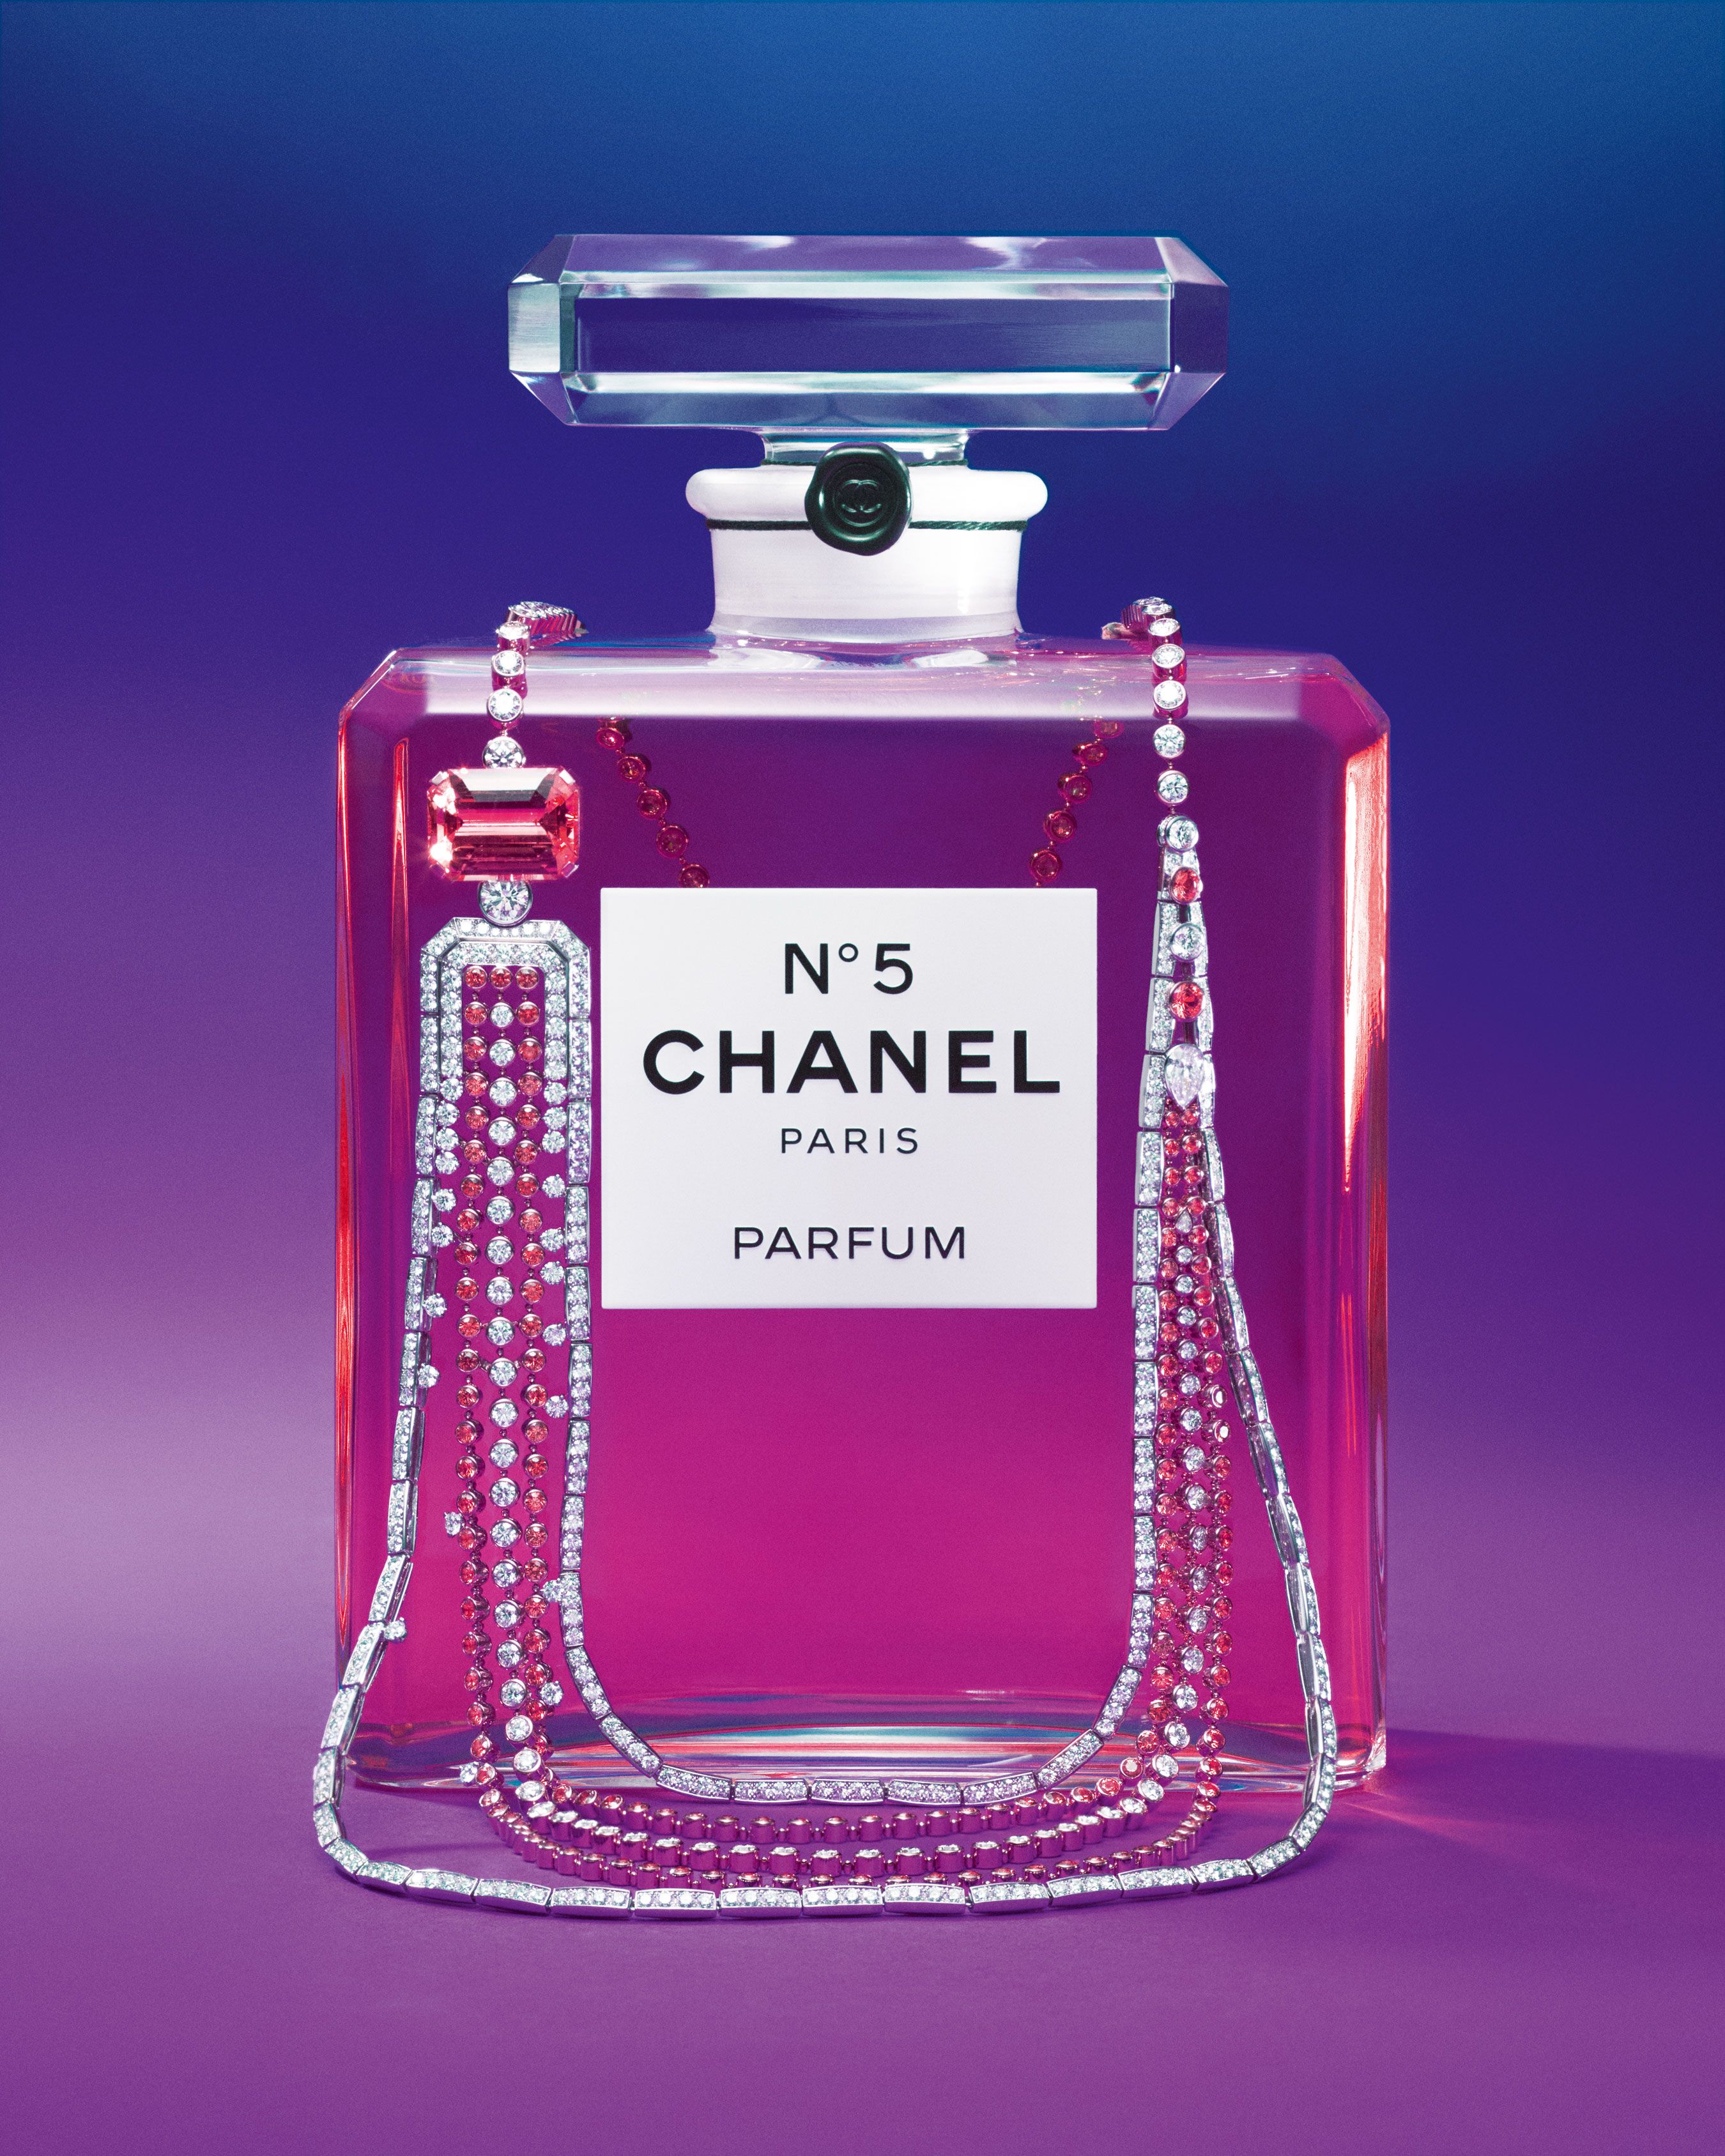 History Of Chanel No 5 How A Legendary Perfume Stayed On Top